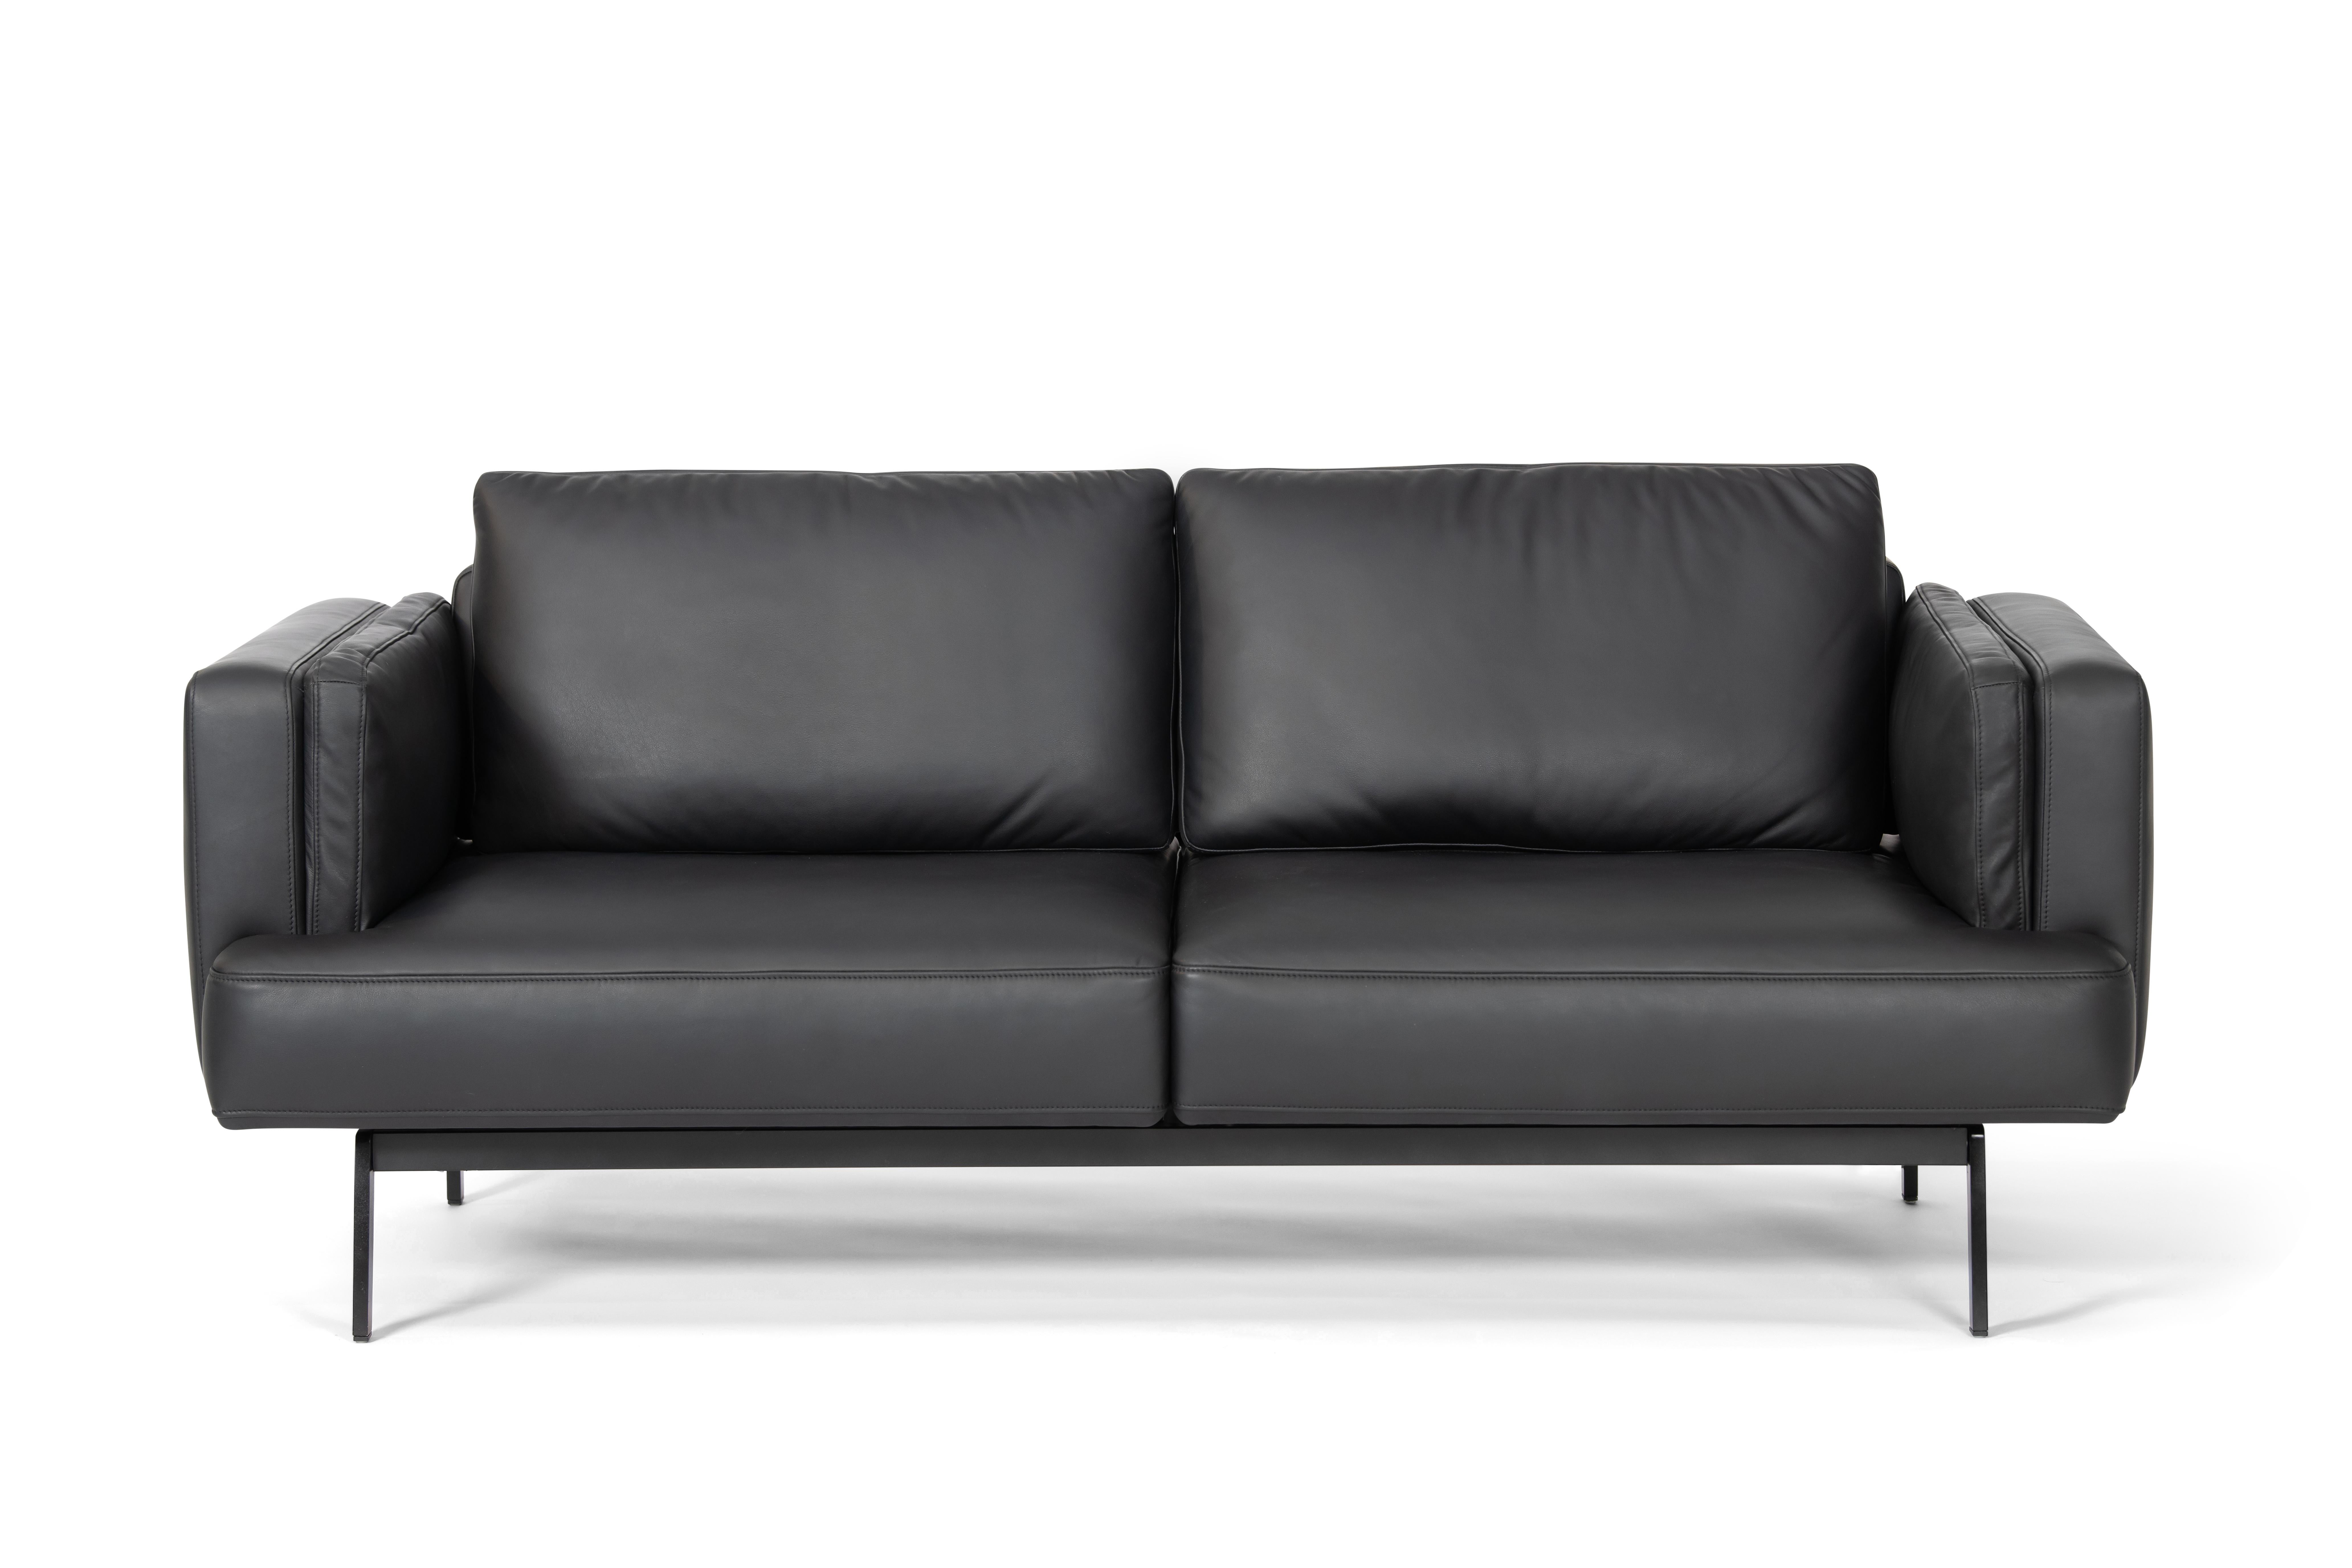 DeSede DS-747/02 Multifunctional Sofa in Black Leather Seat and Back Upholstery For Sale 5